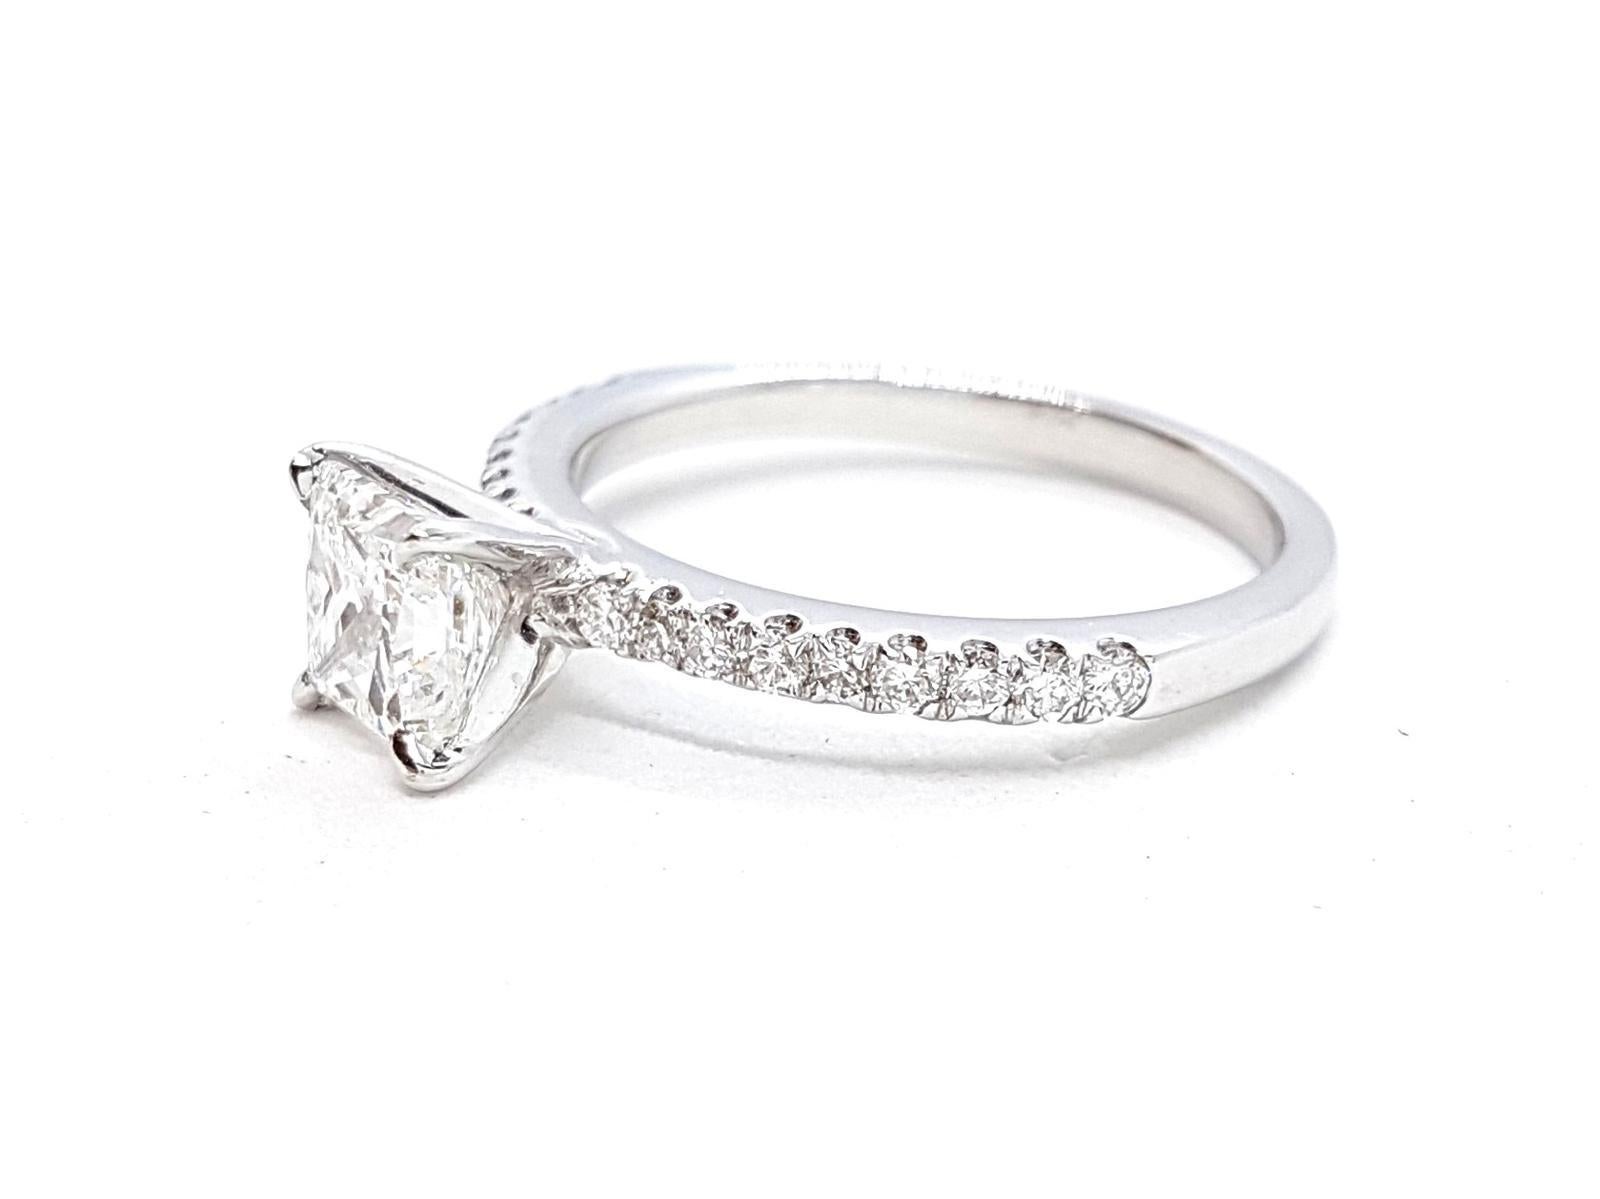 Solitaire in white gold 750 thousandths (18 carats) set with diamonds VS F-size for 1.24 carat total diamond GIA certified center with 1 carat princess cut F-VS2 and supported by 18 round brilliant cut 0.24 ct in total ring size: 53. width on the